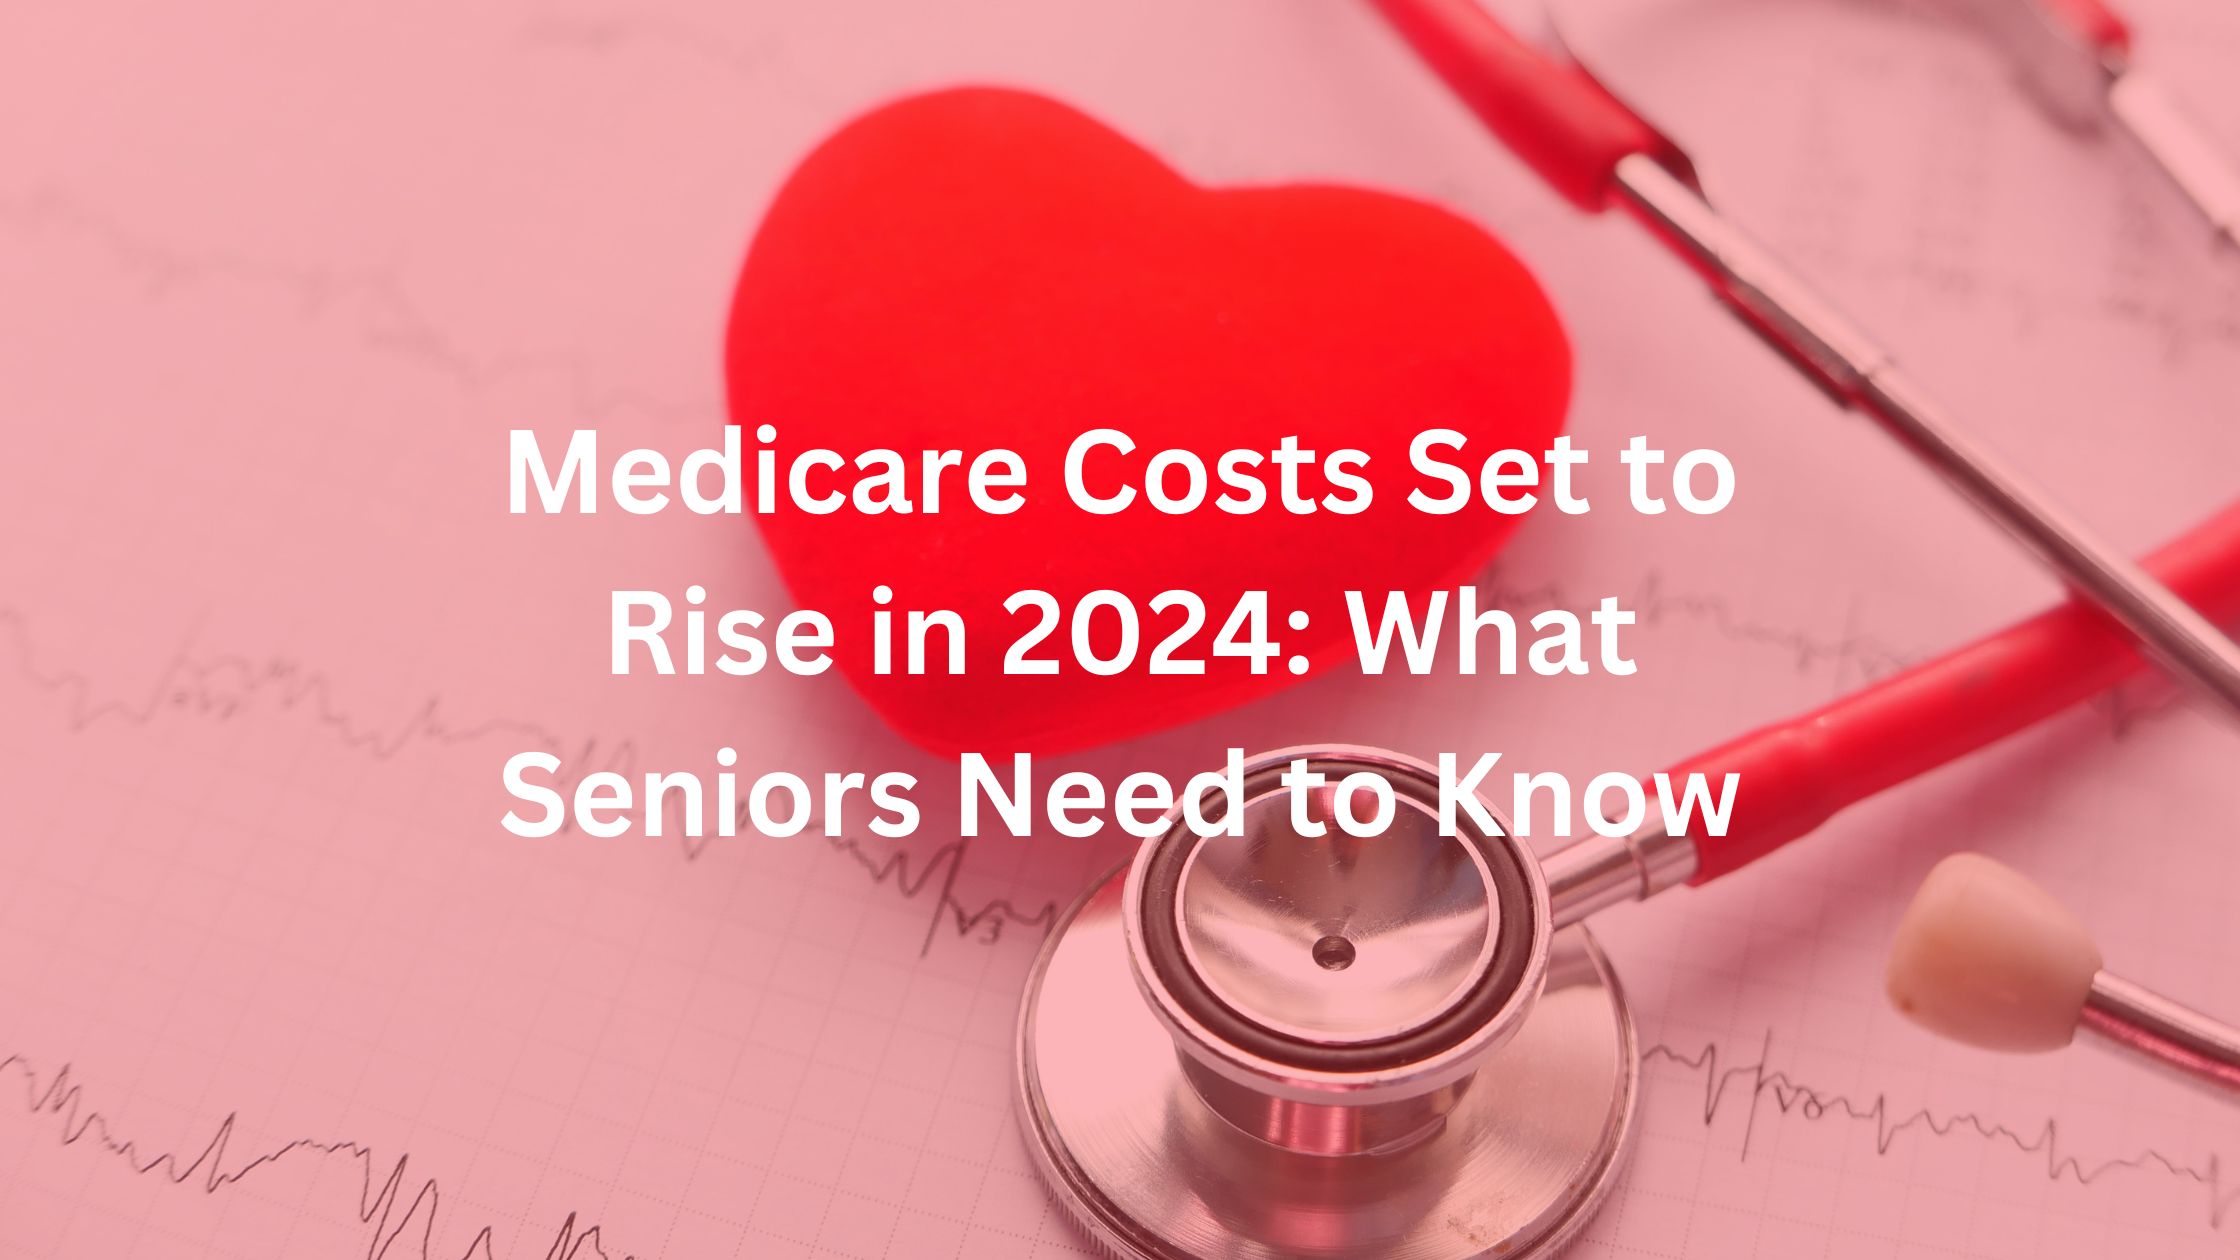 Medicare Costs Set to Rise in 2024 What Seniors Need to Know